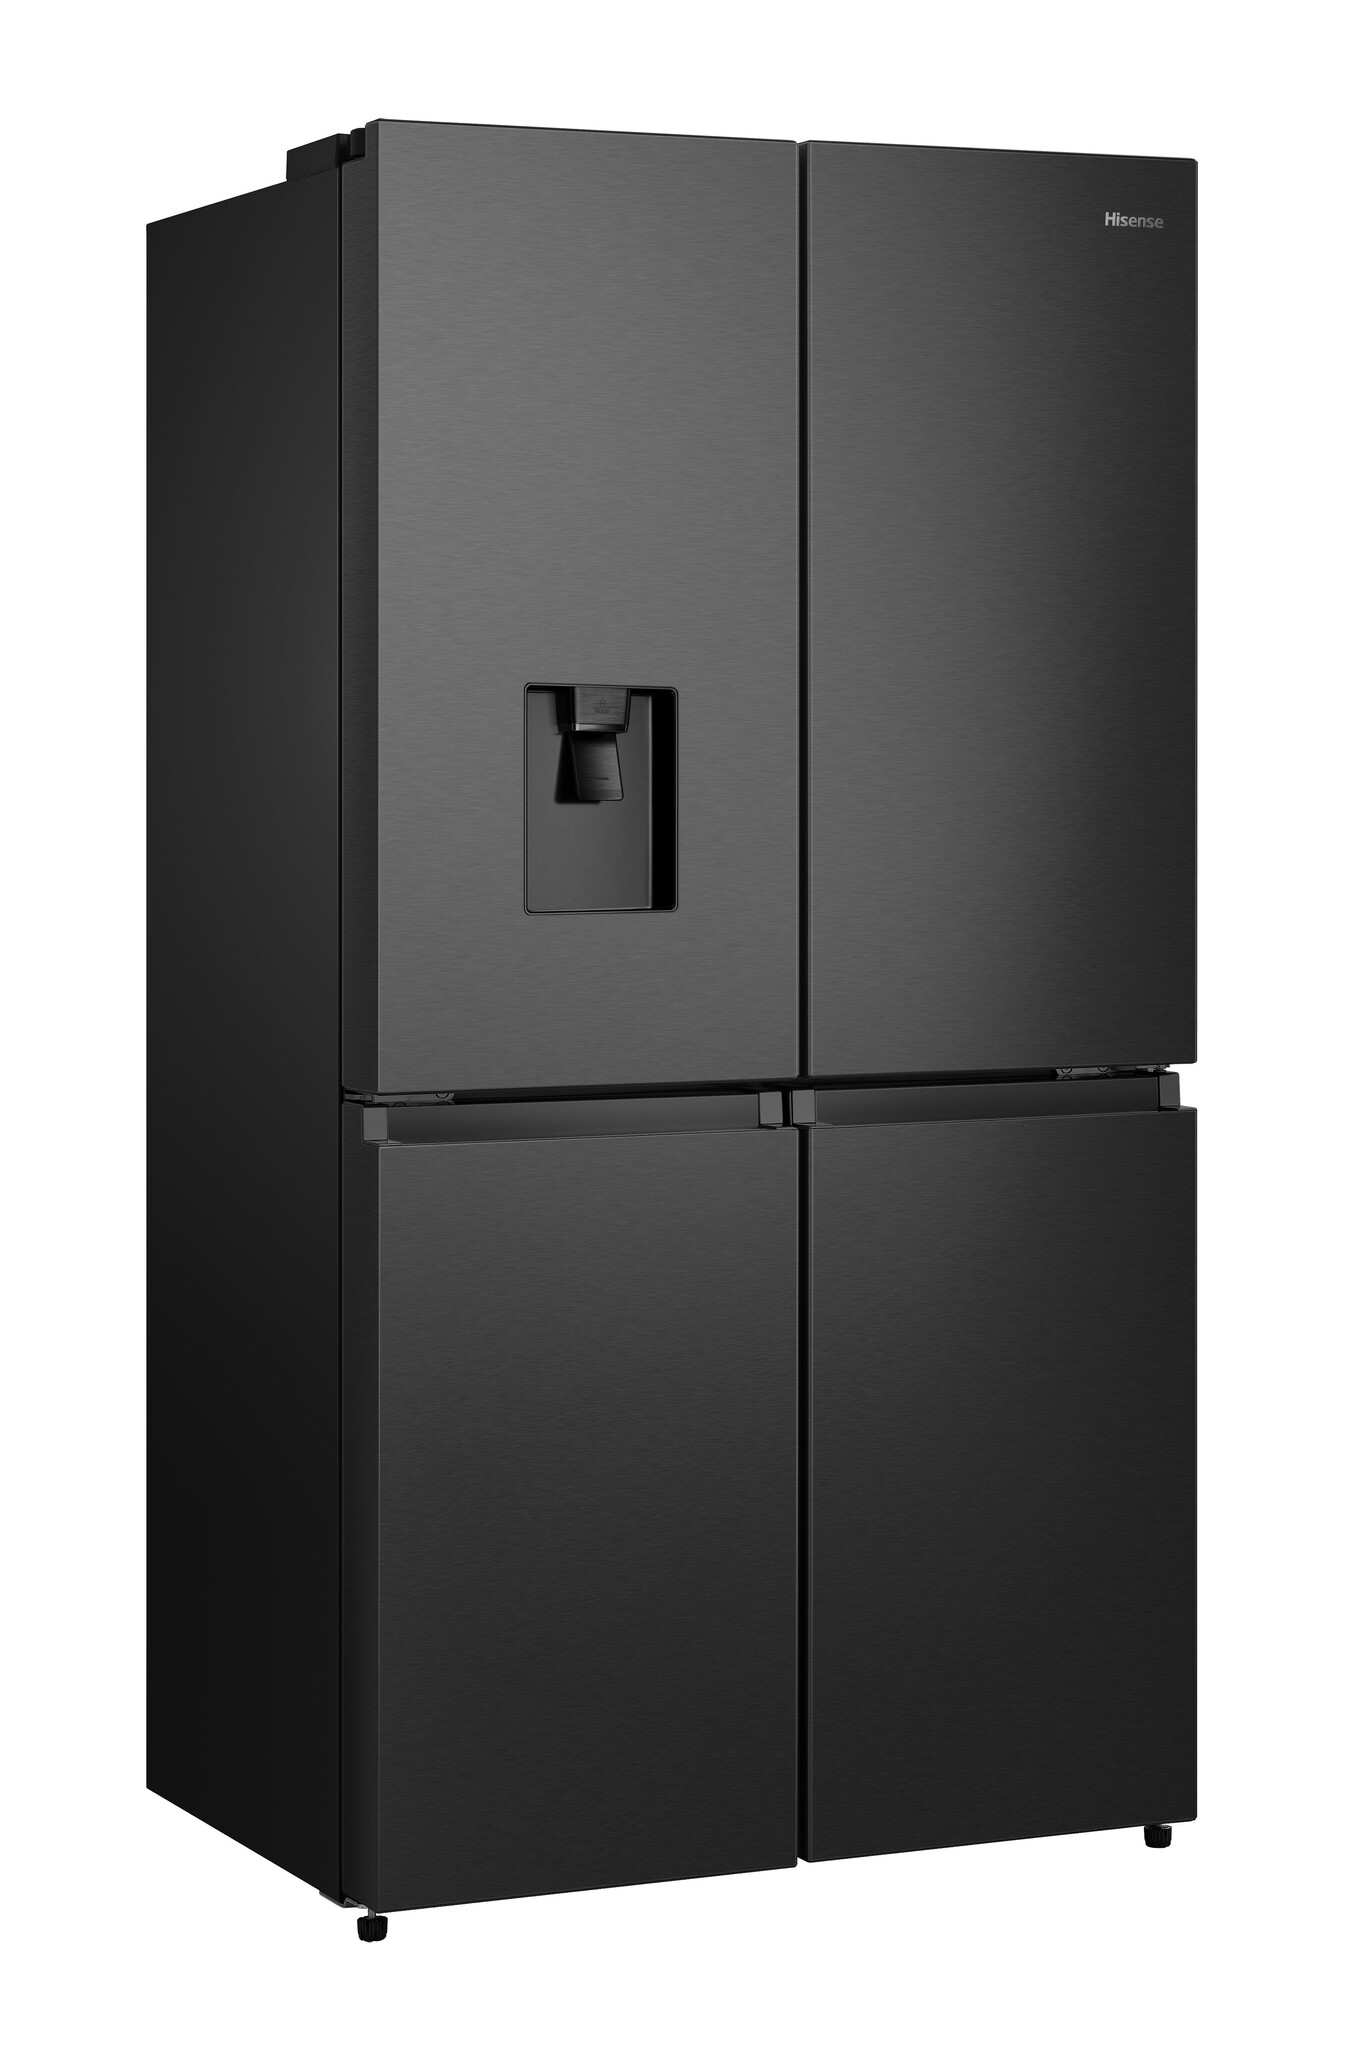 Hisense RQ758N4SWFE Wifi Connected Total No Frost American Fridge Freezer – Black – E Rated #364041